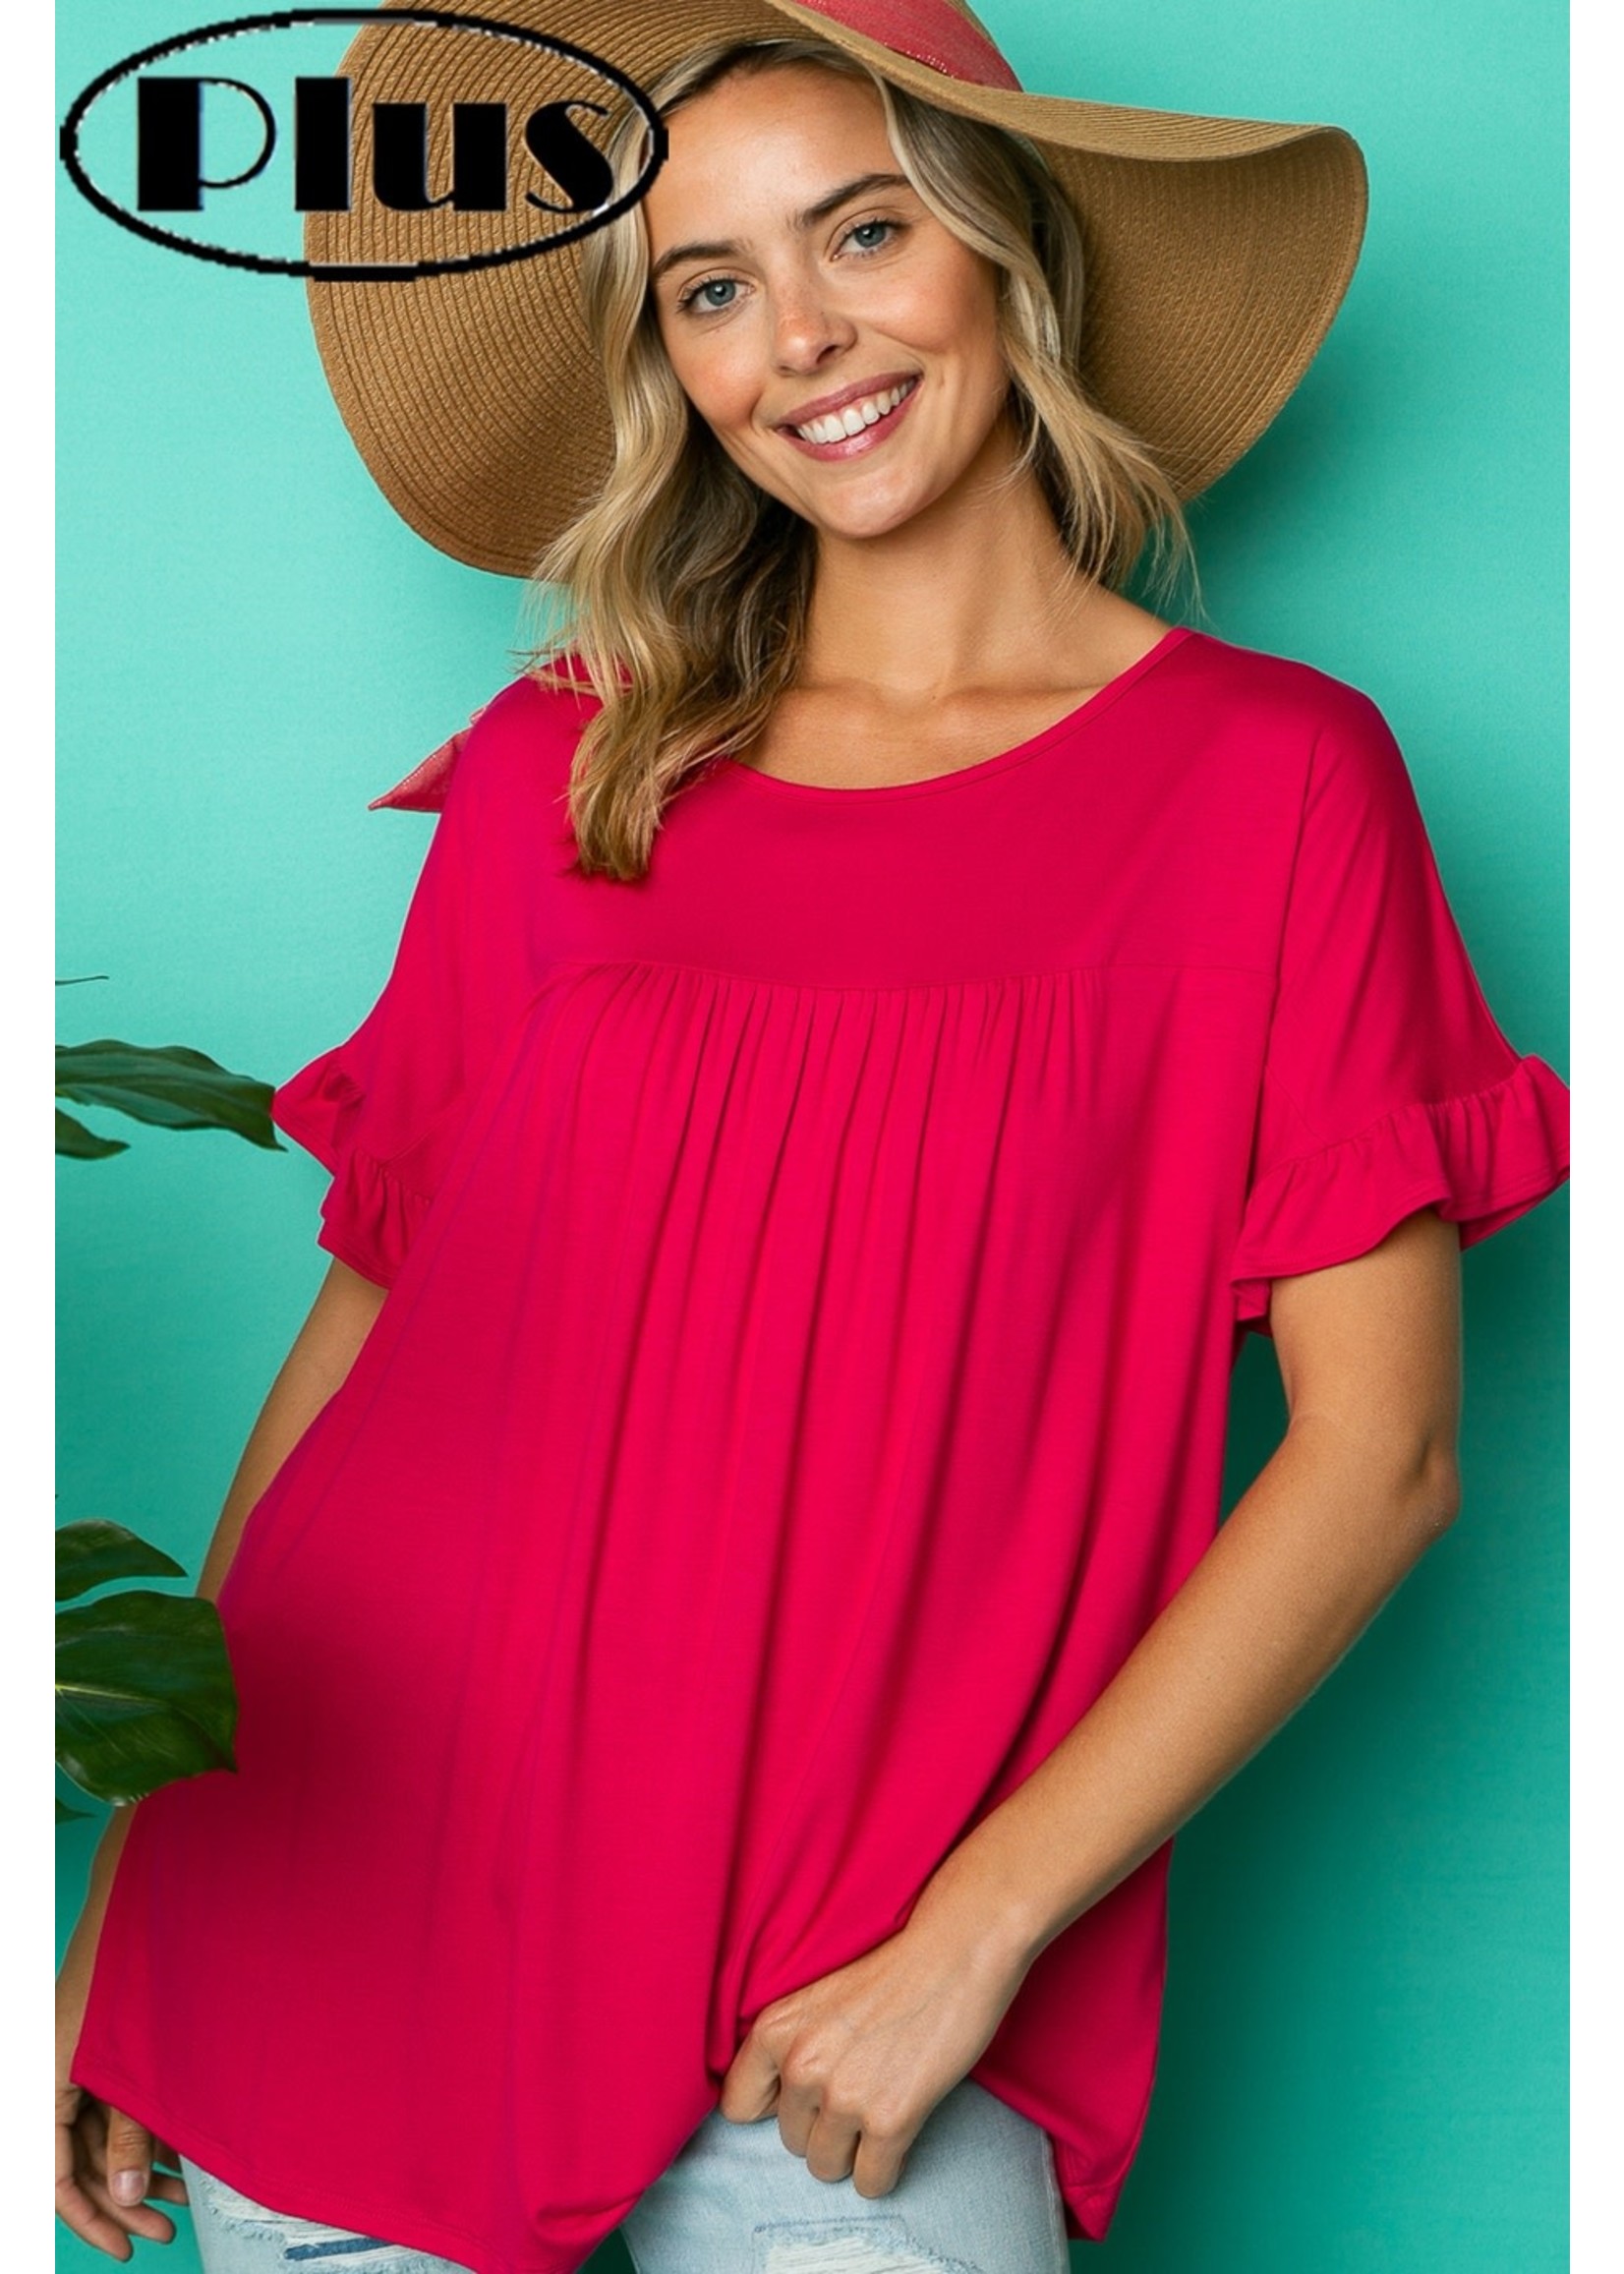 Ruffled Sleeve Baby Doll Top in 3 colors